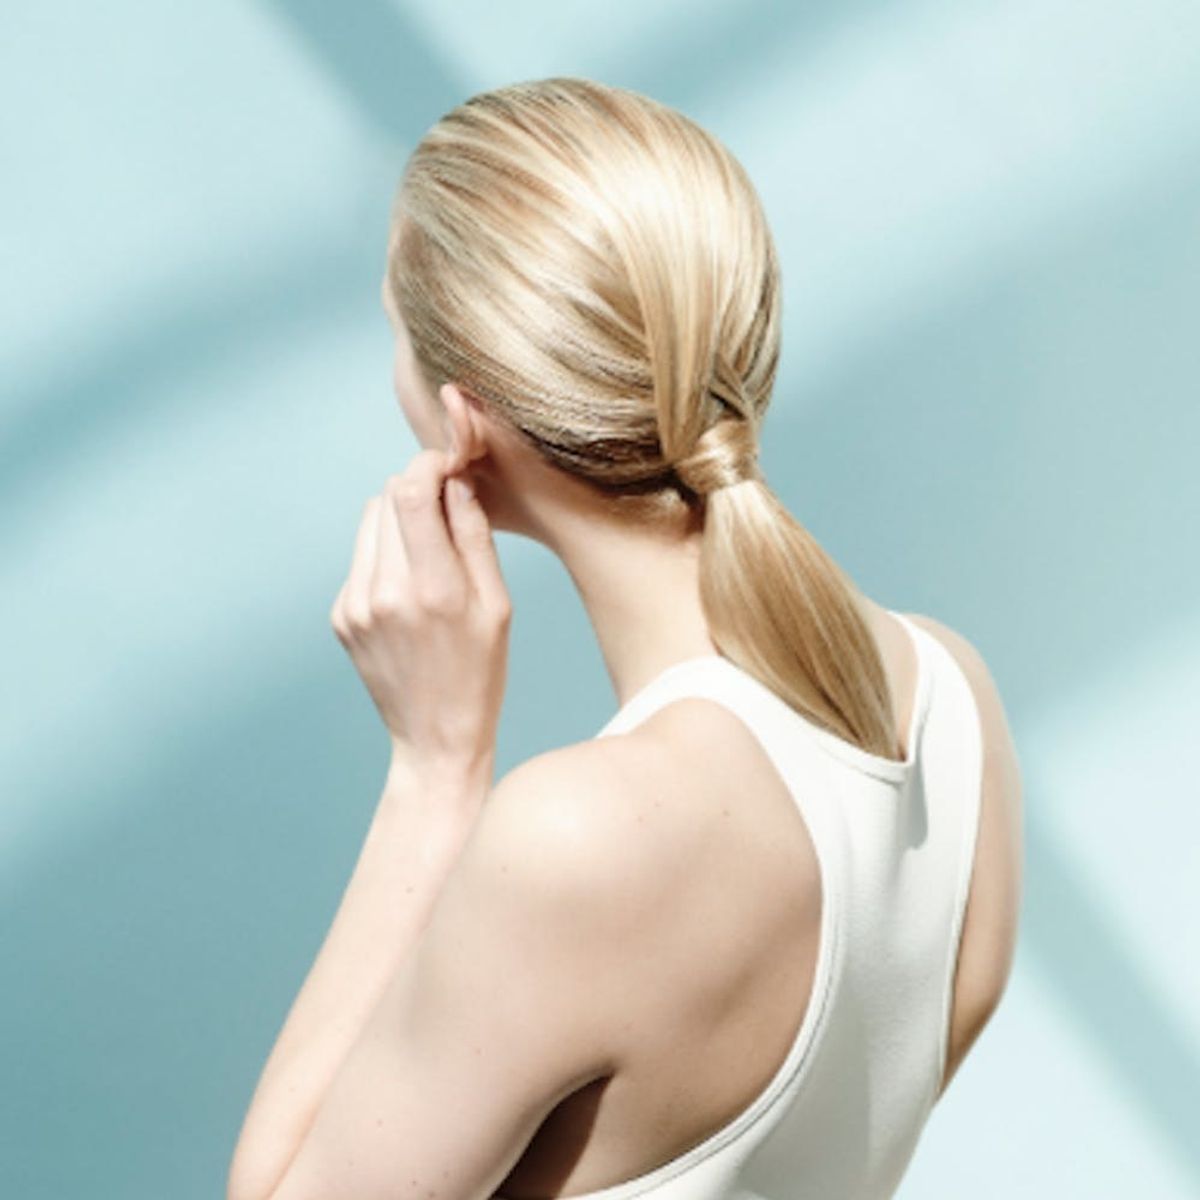 11 Knotted Ponytail Hairstyles That Look Chic When You Just Can’t Even